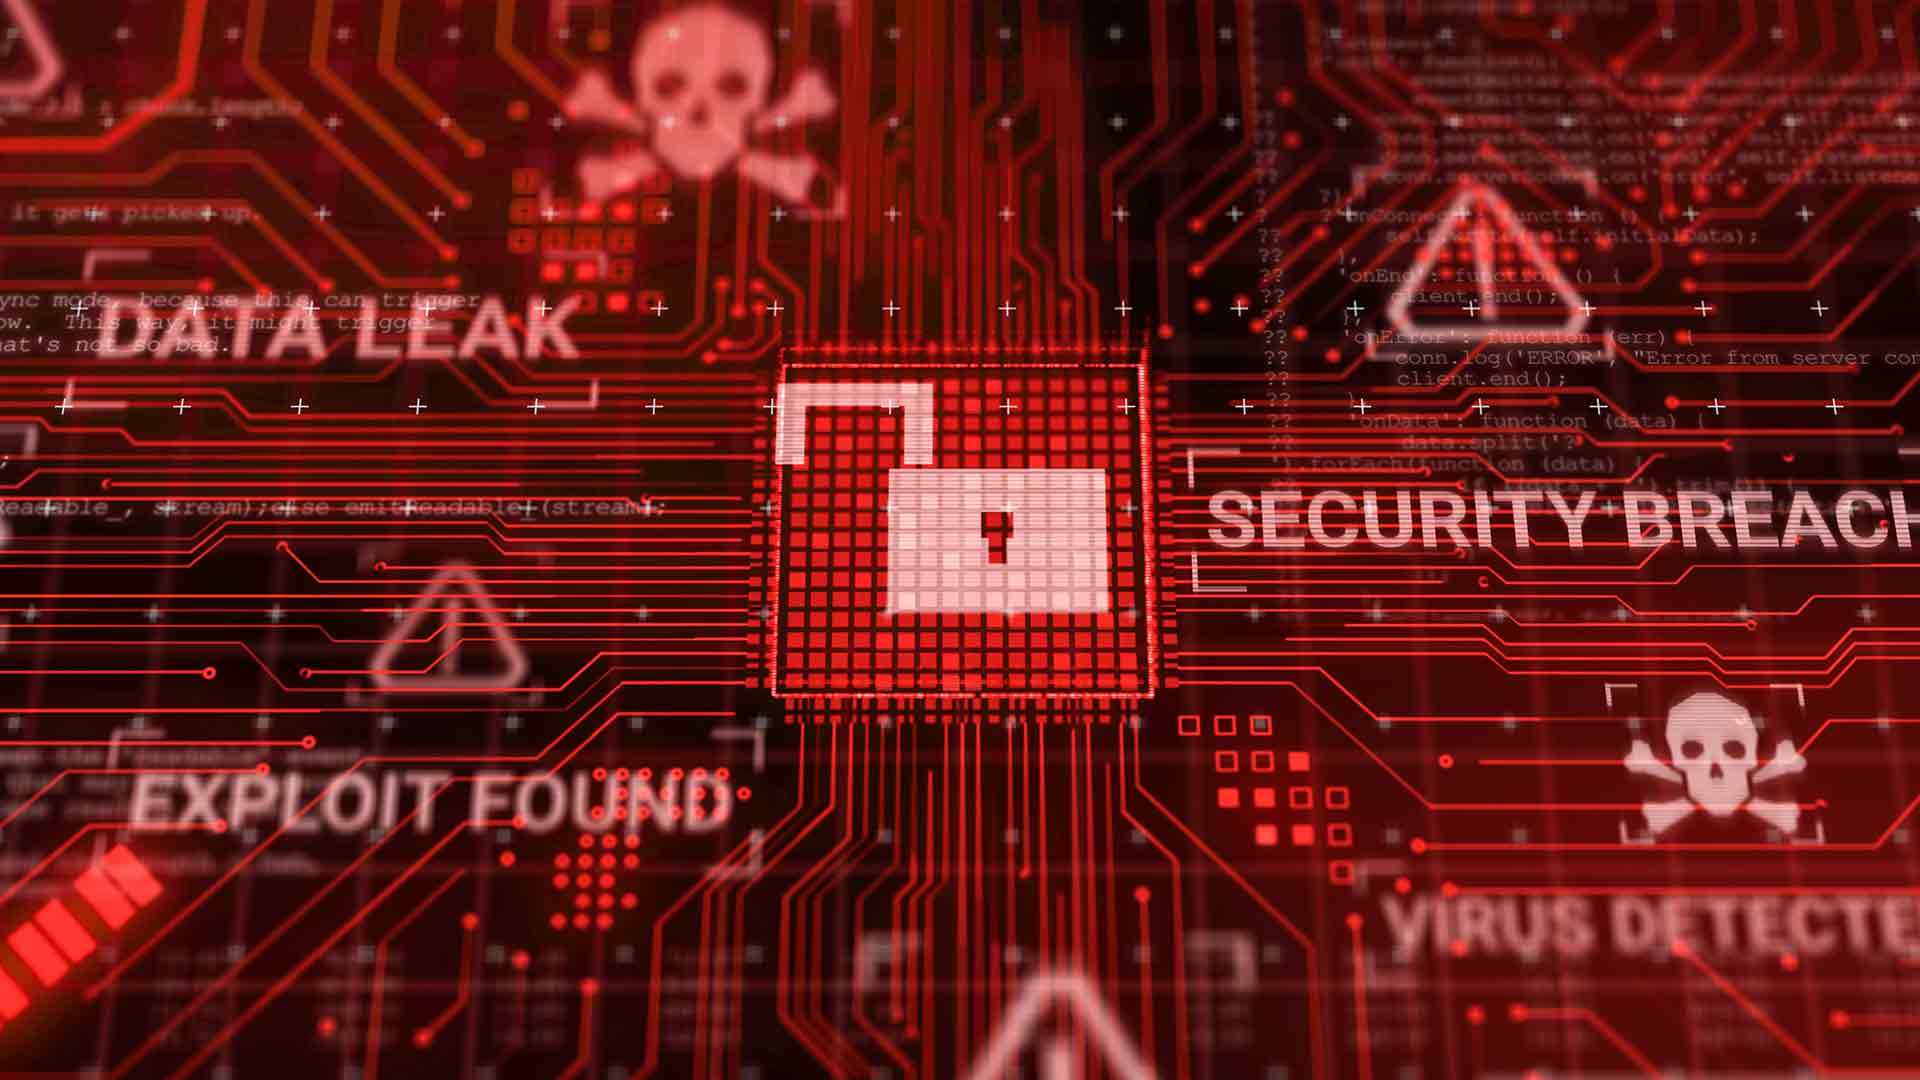 hacker-attack-computer-hardware-microchip-while-process-data-through-internet-network-3d-rendering-insecure-cyber-security-exploit-database-breach-concept-virus-malware-unlock-warning-1